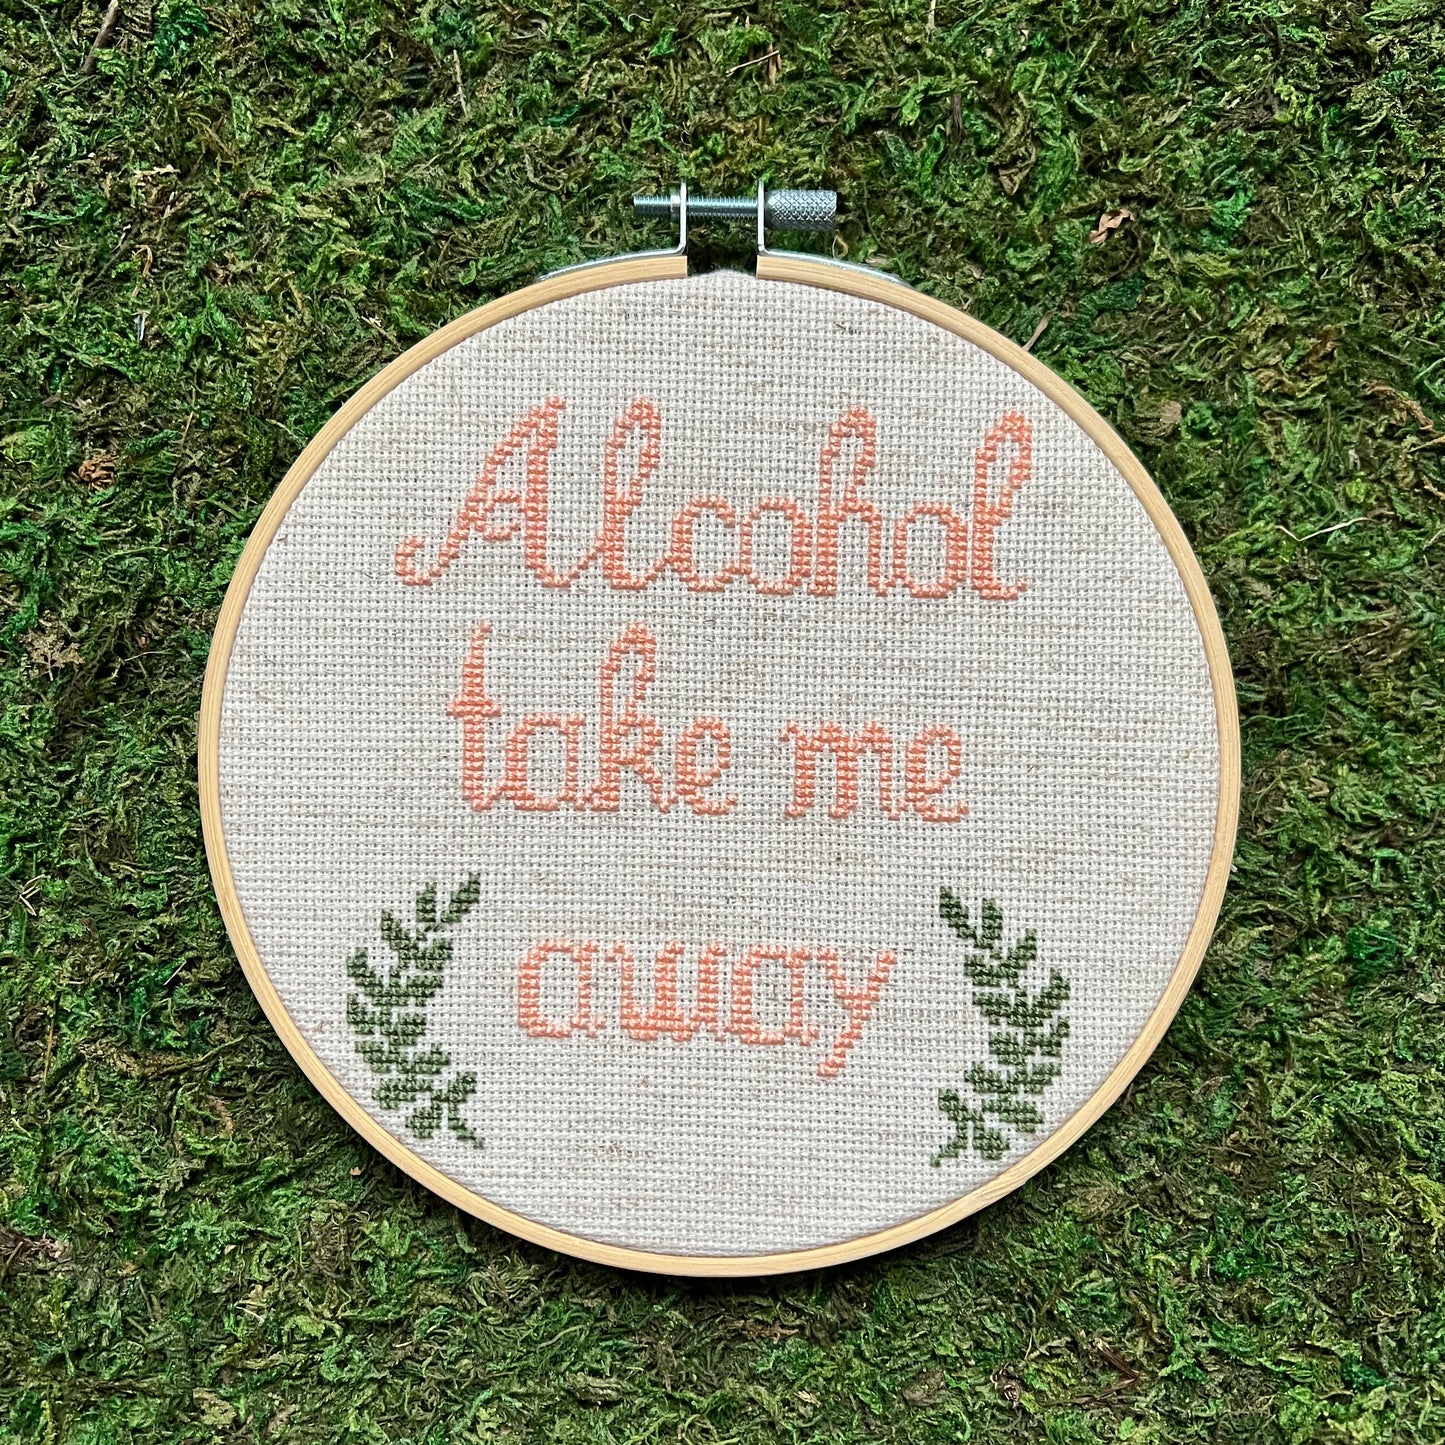 Alcohol Take Me Away 6” Stitched by Hand Cross Stitch Hoop